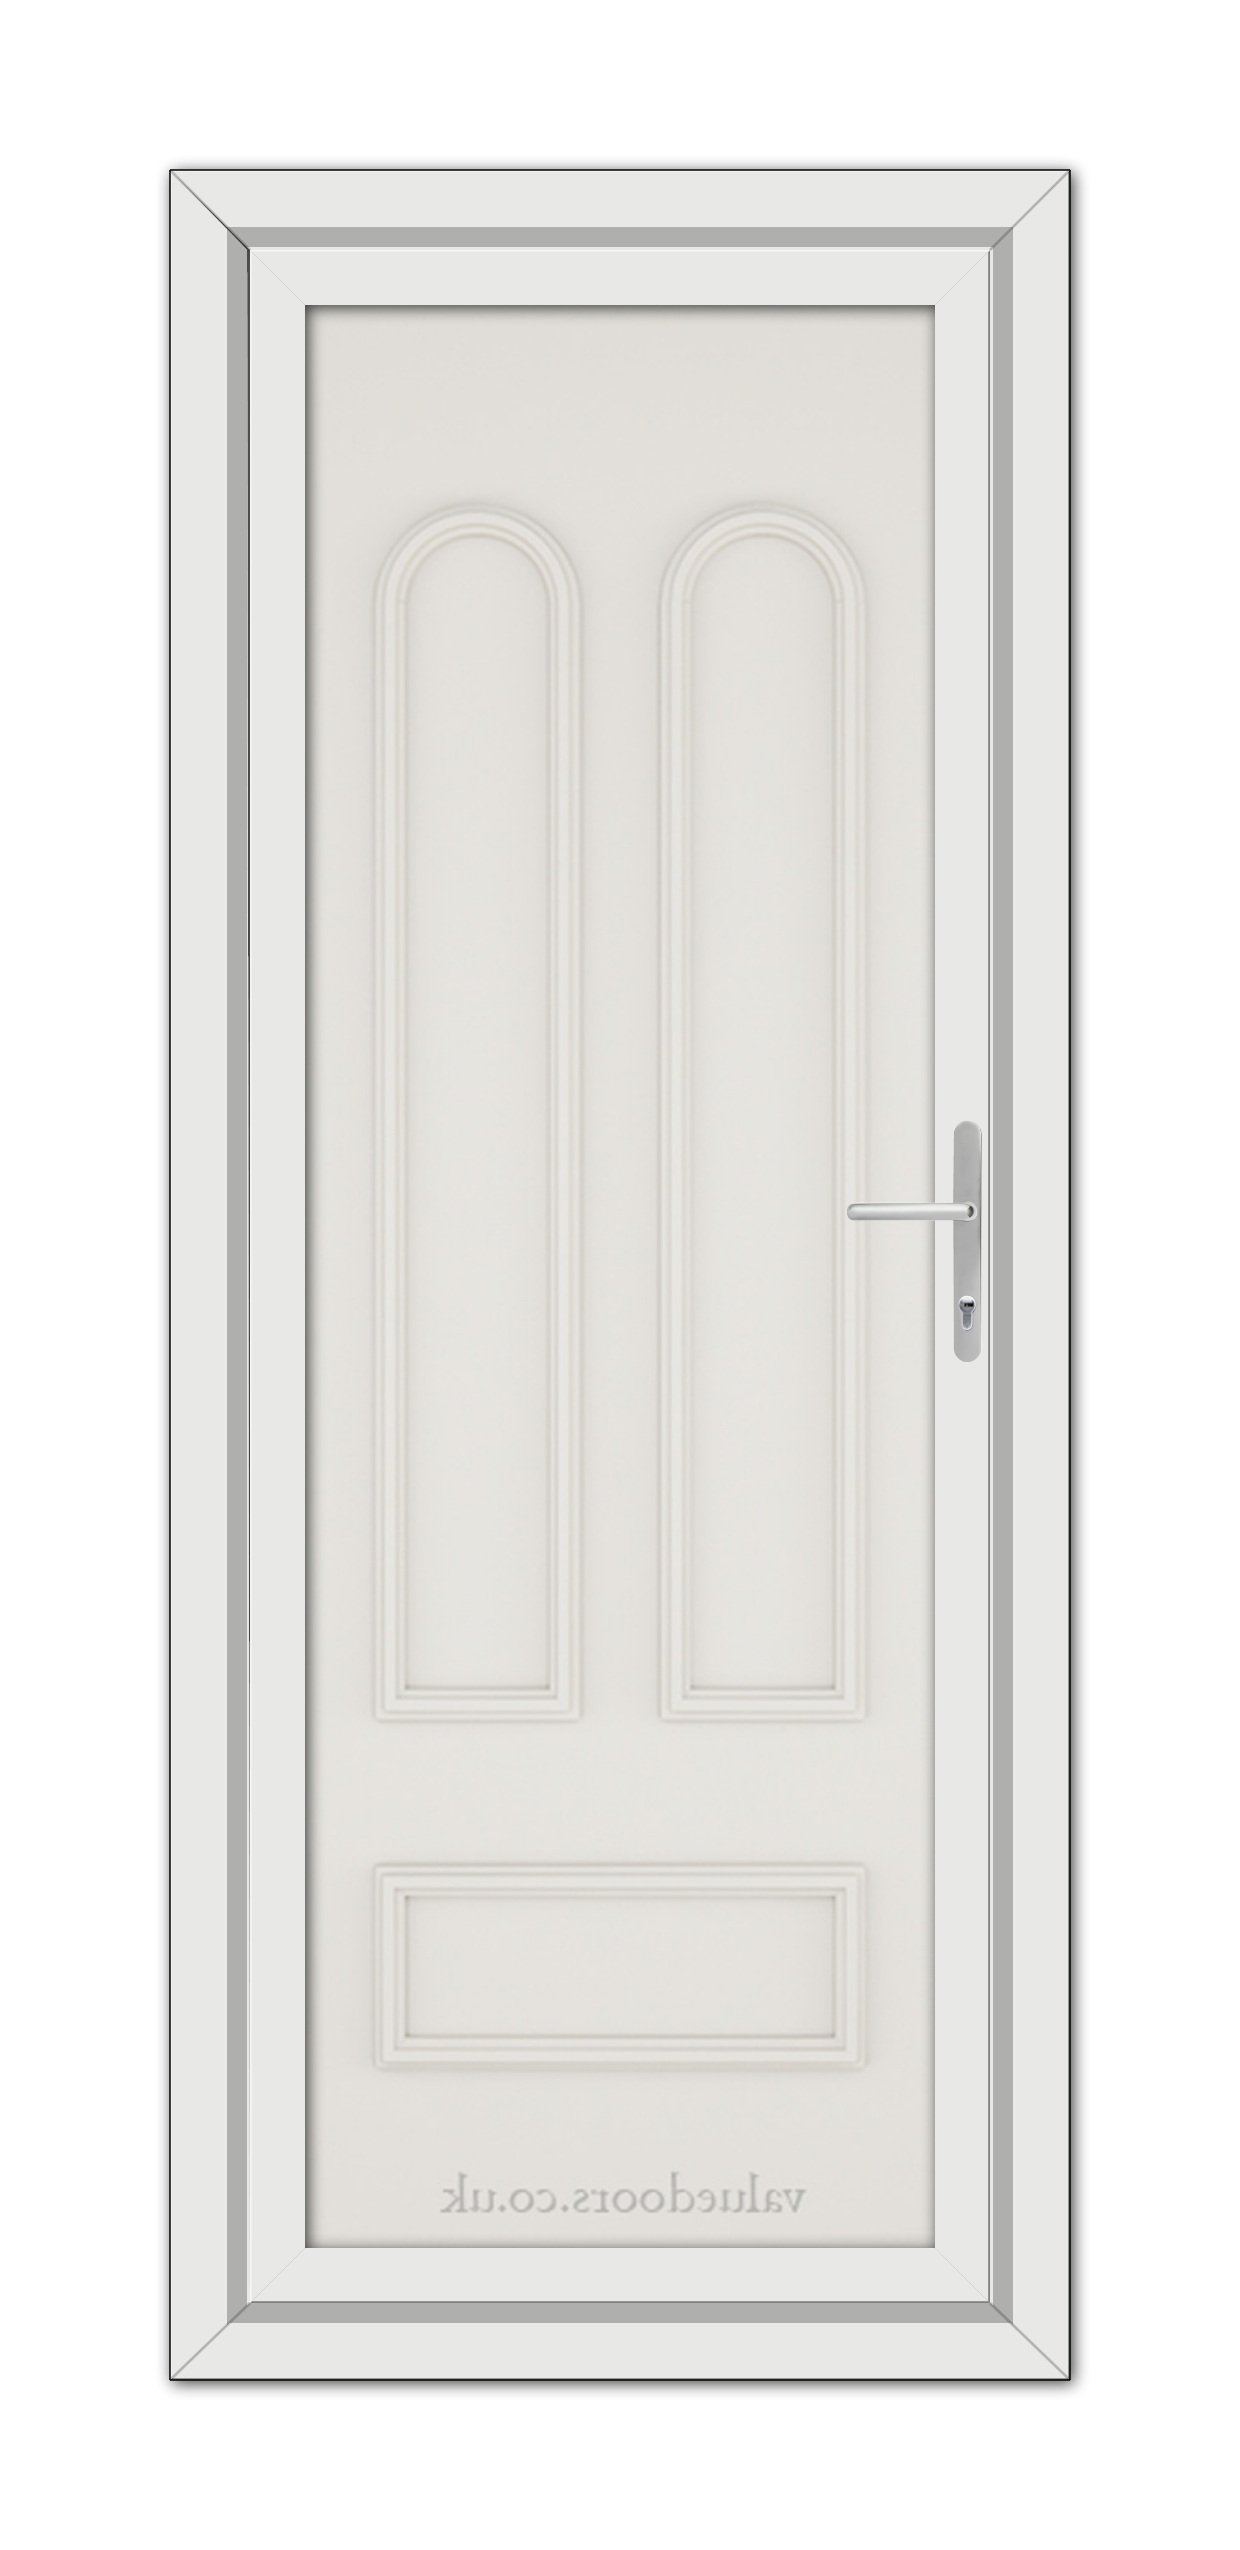 A modern White Cream Madrid Solid uPVC Door with a vertical double-panel design and a metallic handle, set within a simple frame.